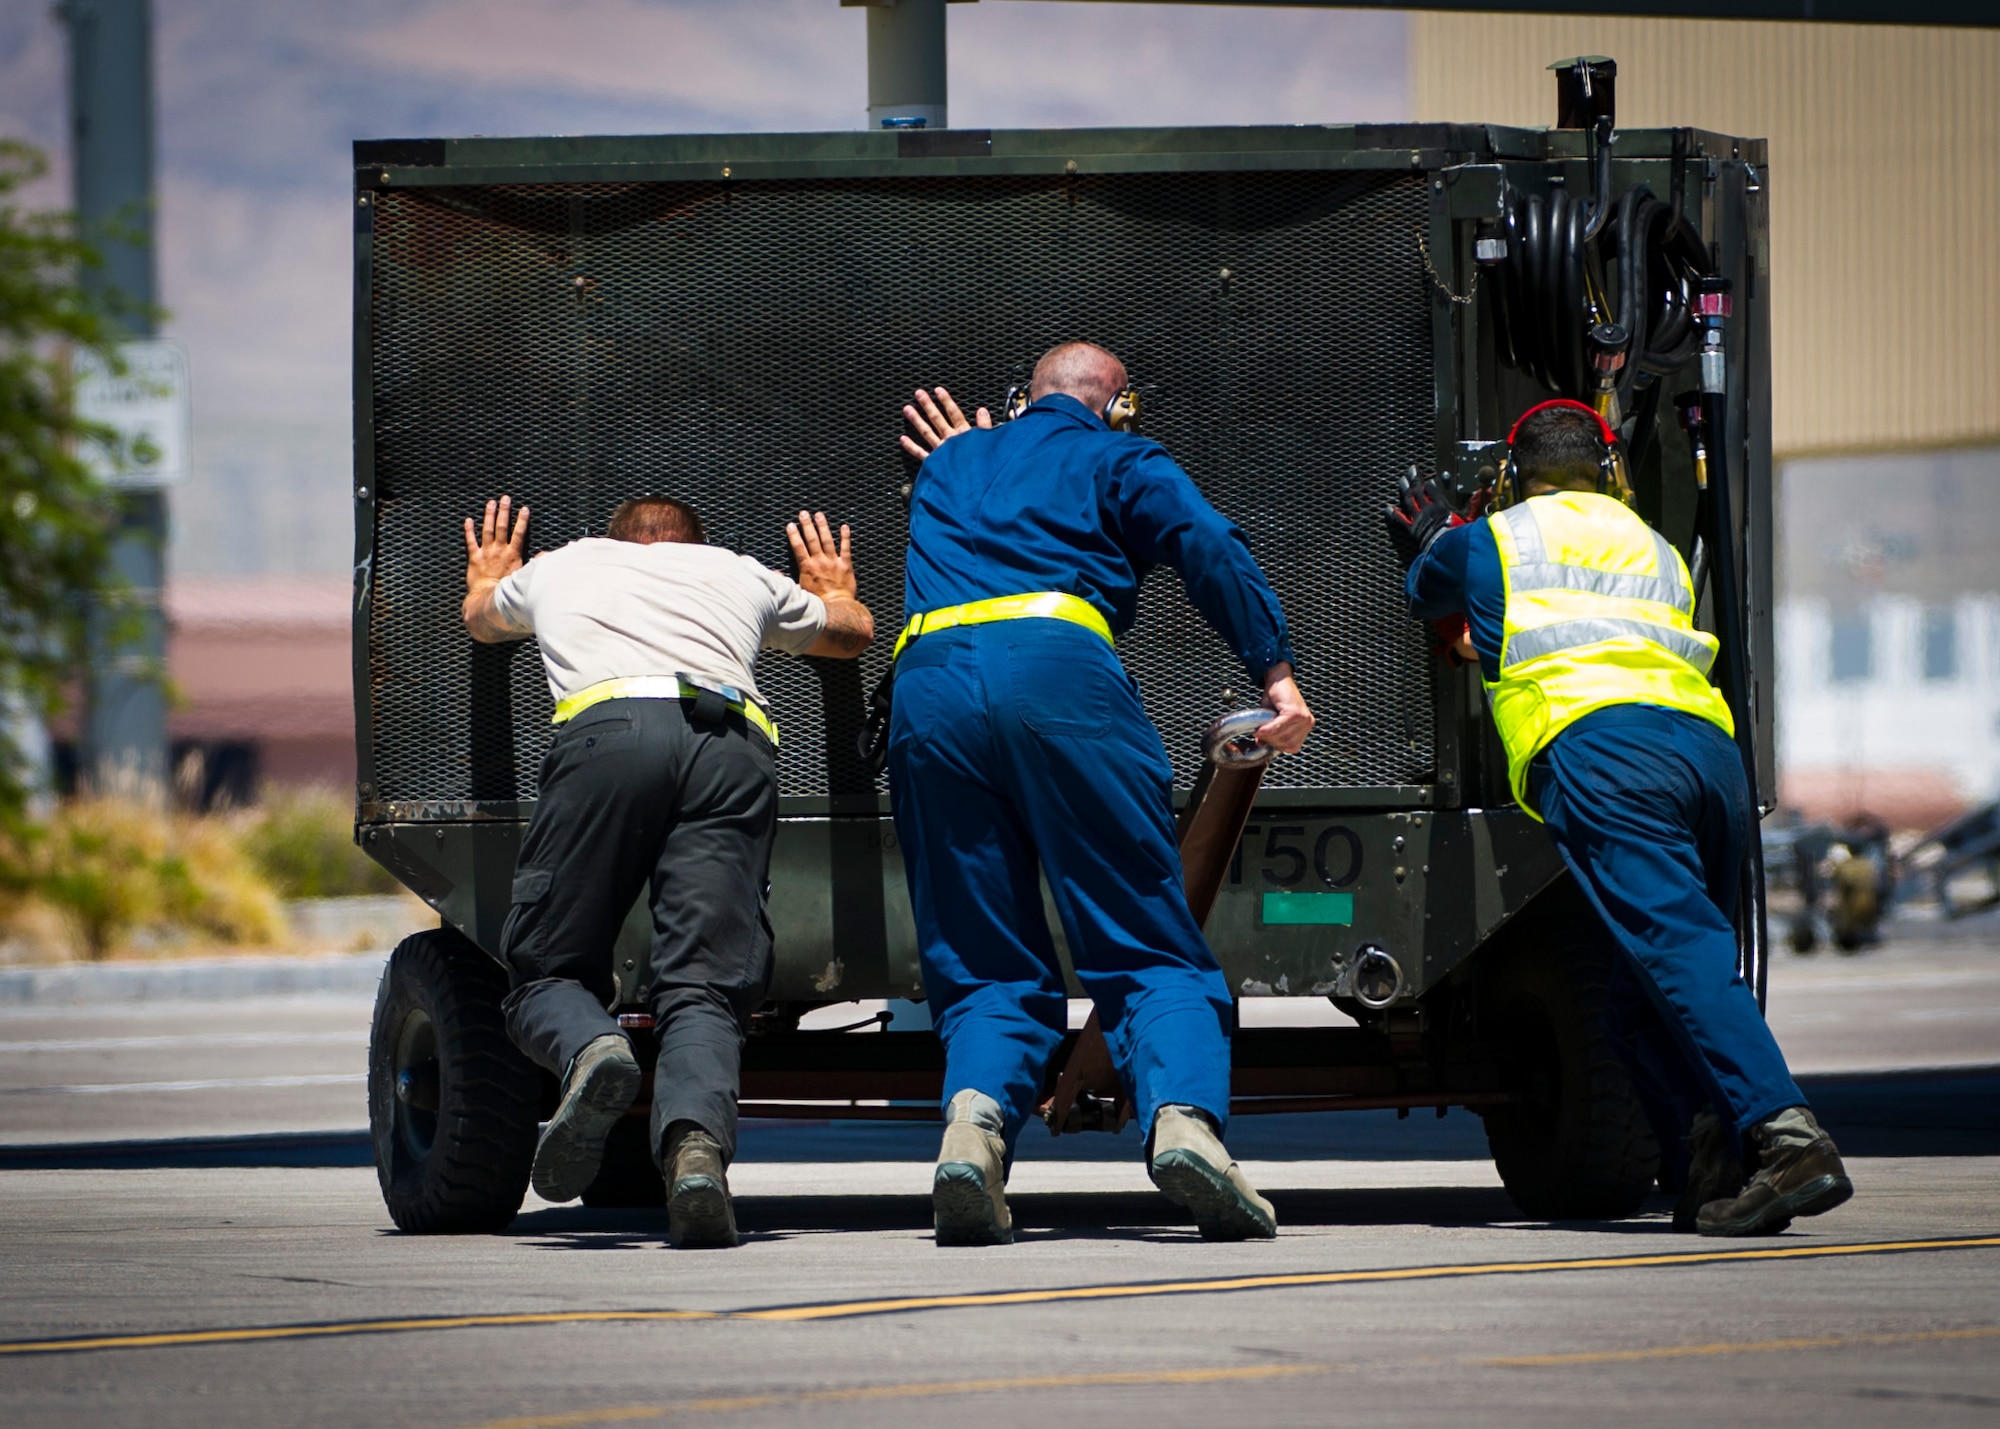 Crew chiefs assigned to the 57th Aircraft Maintenance Squadron push a aircraft hydraulic power supply July 13, 2019, at Nellis Air Force Base, Nev. Red Flag focuses on the application of core missions to include Command and Control, Intelligence Surveillance, Strike and Personnel Recovery and how to work with Coalition counterparts to ensure success. The 706th Fighter Squadron oversees Air Force Reserve Command members assigned to the U.S. Air Force Warfare Center, supporting missions in its 57th Wing, 53rd Wing and 505th Command and Control Wing. Pilots assigned to the 706 FS fly an array of aircraft to include the F-15C, F-15E, F-16, F-22 and F-35 aircraft. To prepare combat air forces, joint and allied crews with realistic training, pilots in the 706 FS operate with the 64th Aggressor Squadron to facilitate operational threat replication, training, and feedback. The Red Flag exercise will continue through July 26, 2019.